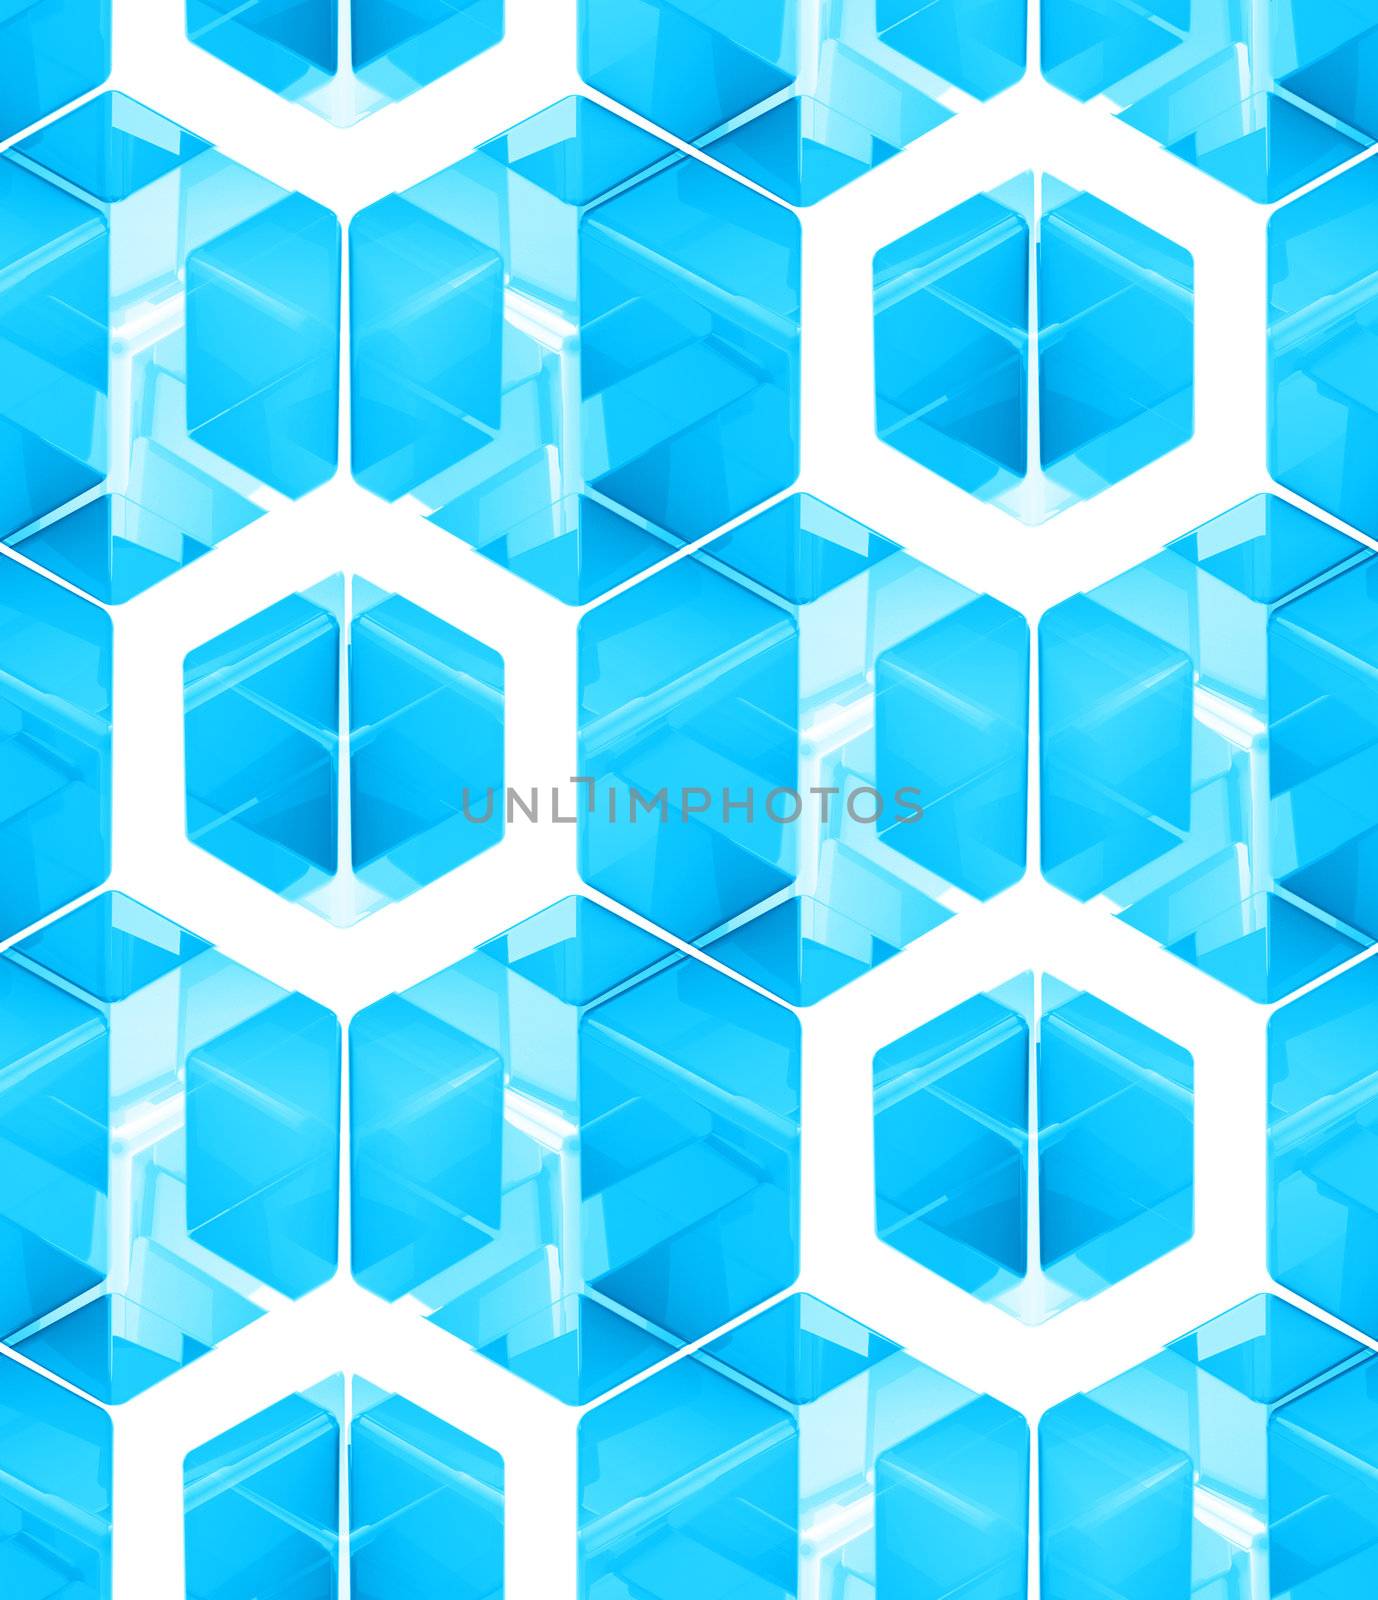 Seamless abstract colorful background made of cubes and hexagons